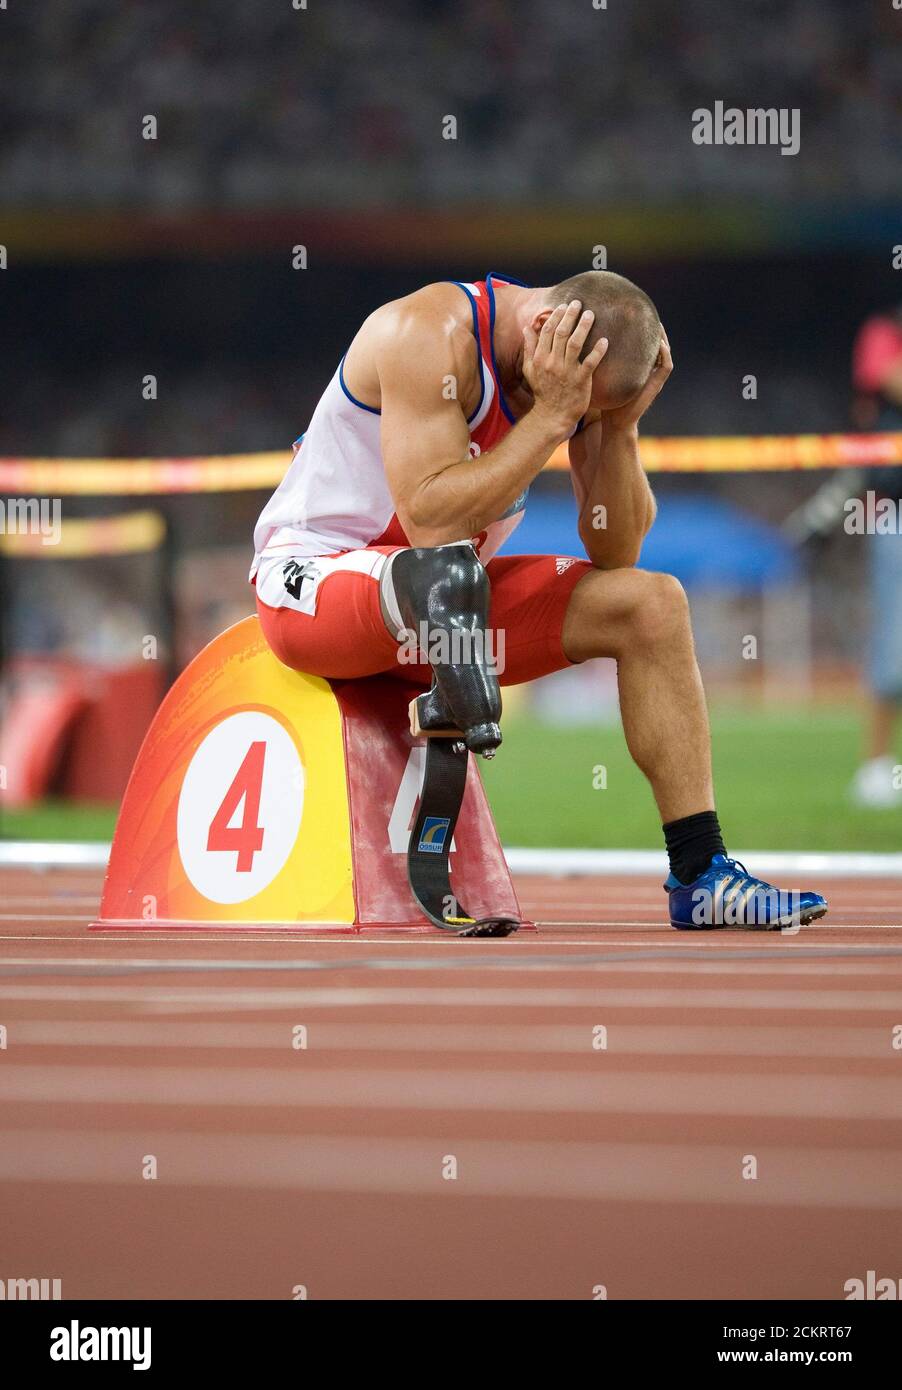 Beijing, China September 11, 2008: Day 5 of competition at the Beijing 2008  Paralympic Games showing pentathlete Urs Kolly of Switzerland concentrating  before the start of the men's P44 400-meters where he